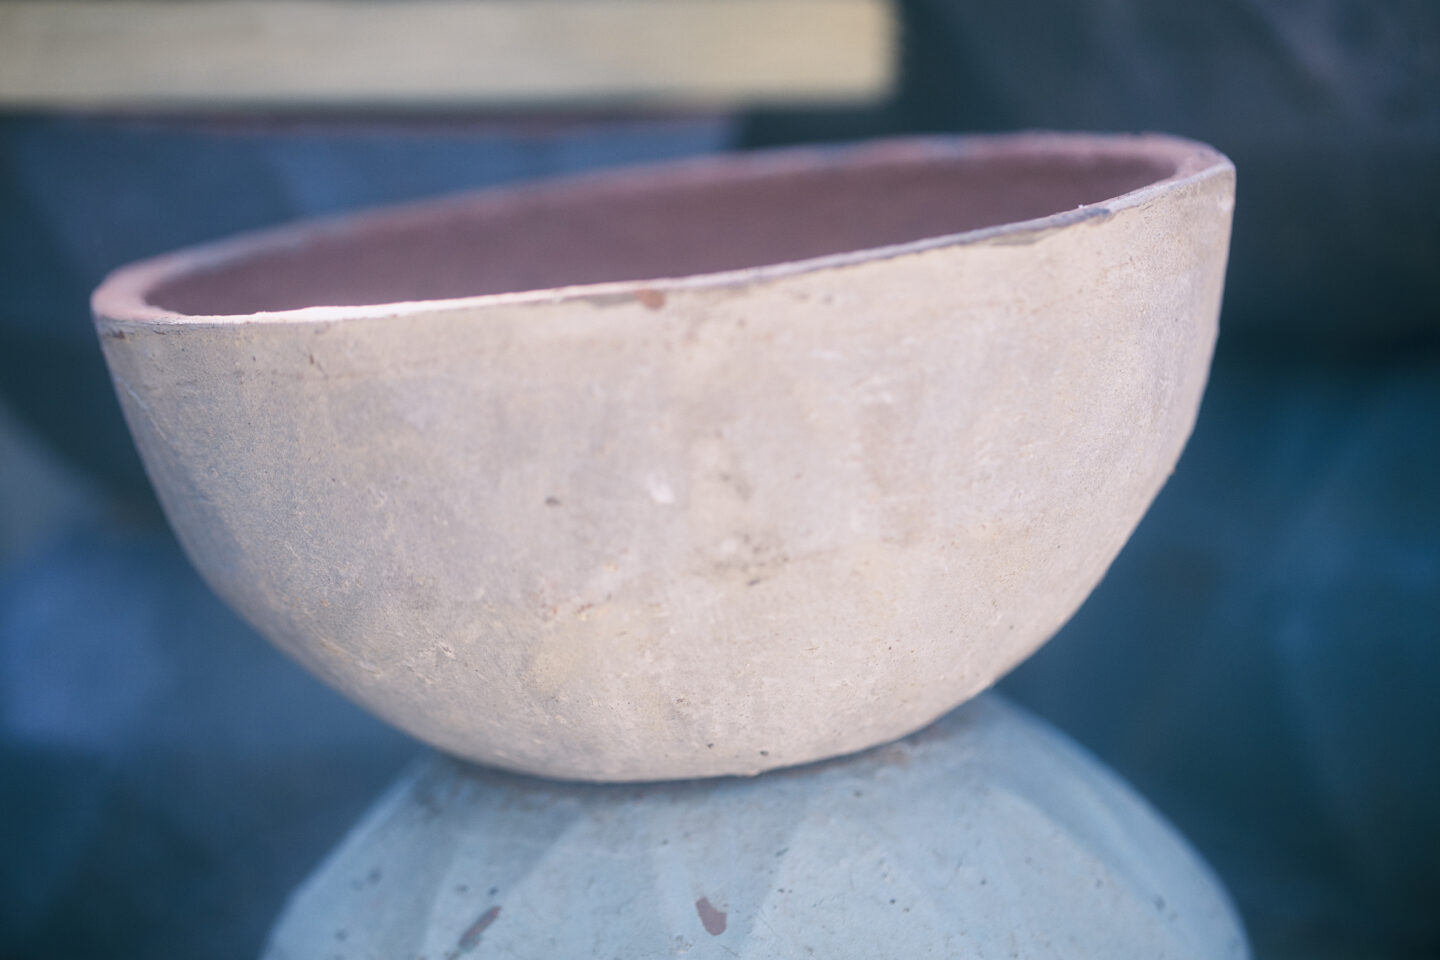 Potter's Bowl, a graphical study of a bowl perched on a stand, done with limited colors for "Chase the Light" by Carol Schiraldi 